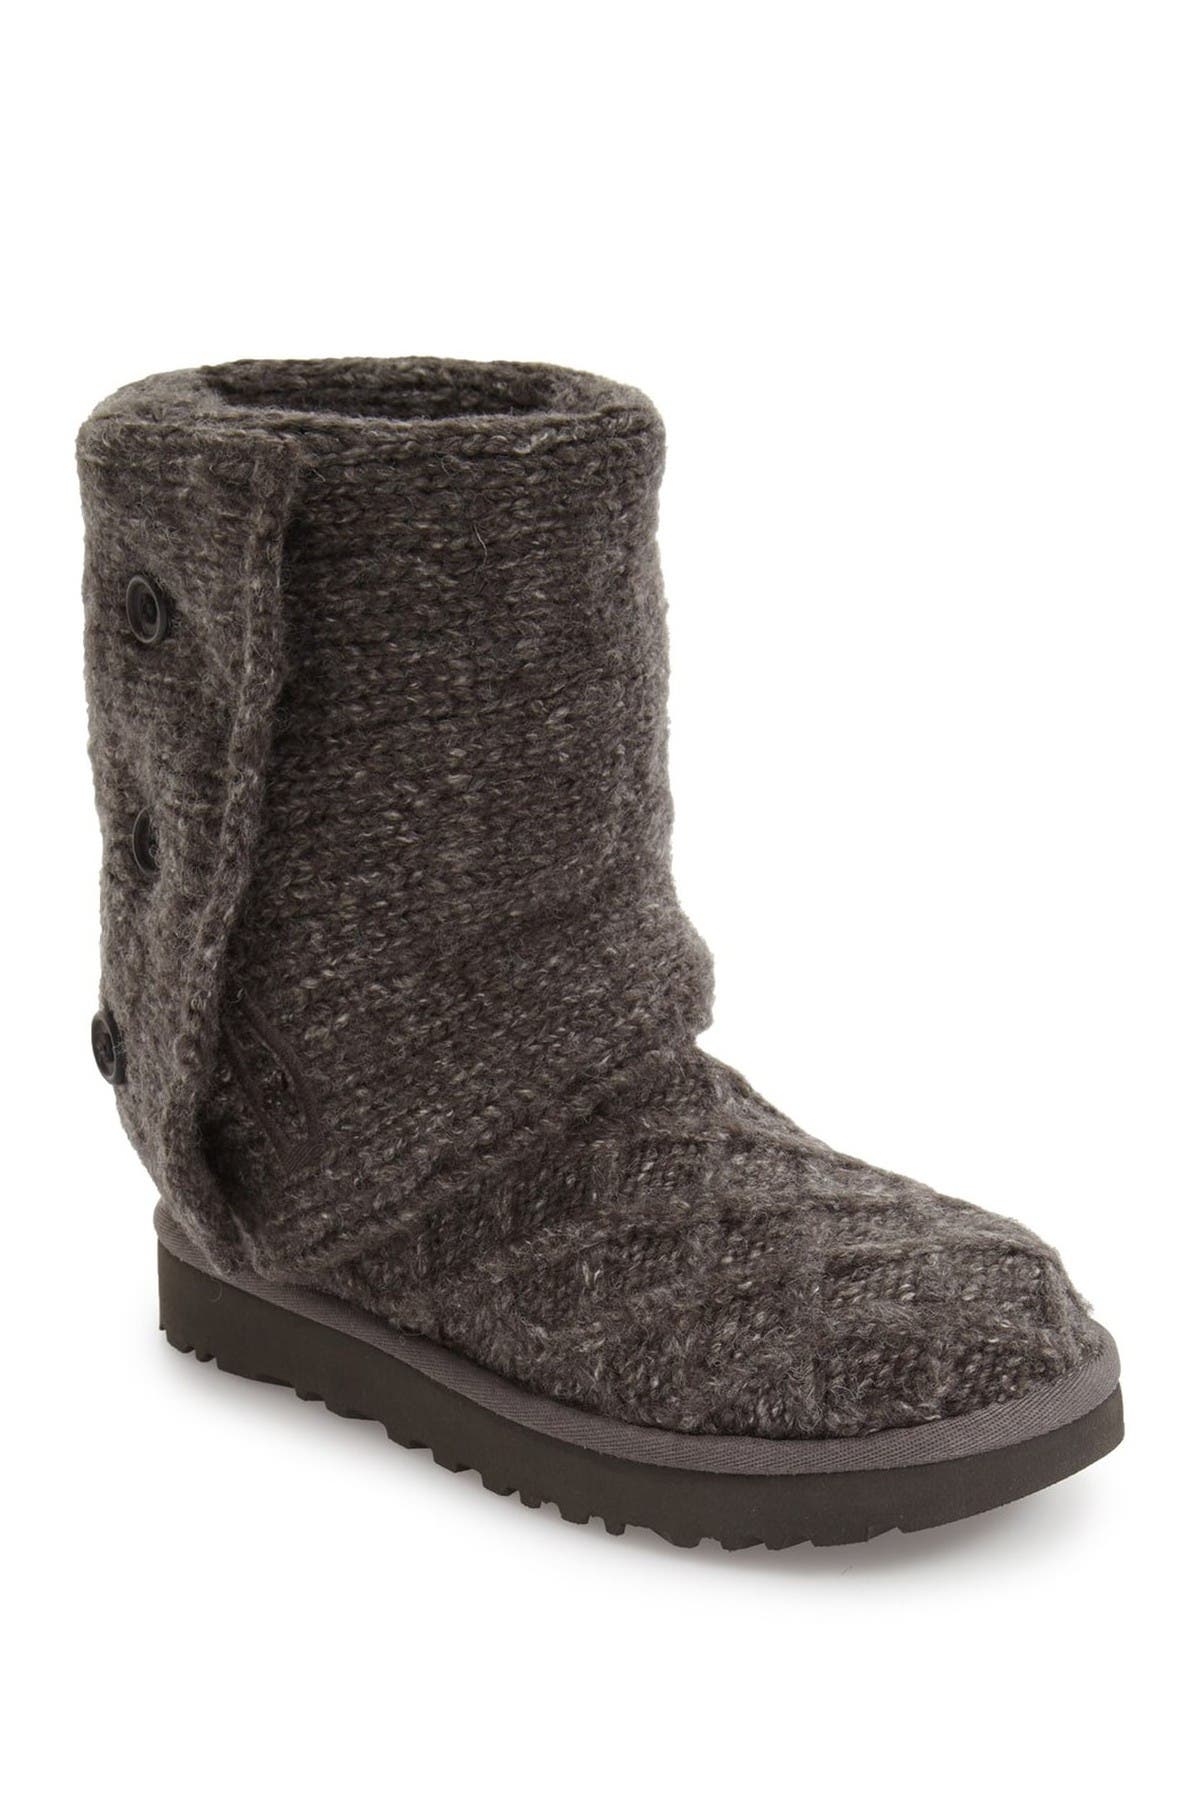 cardy knit boots